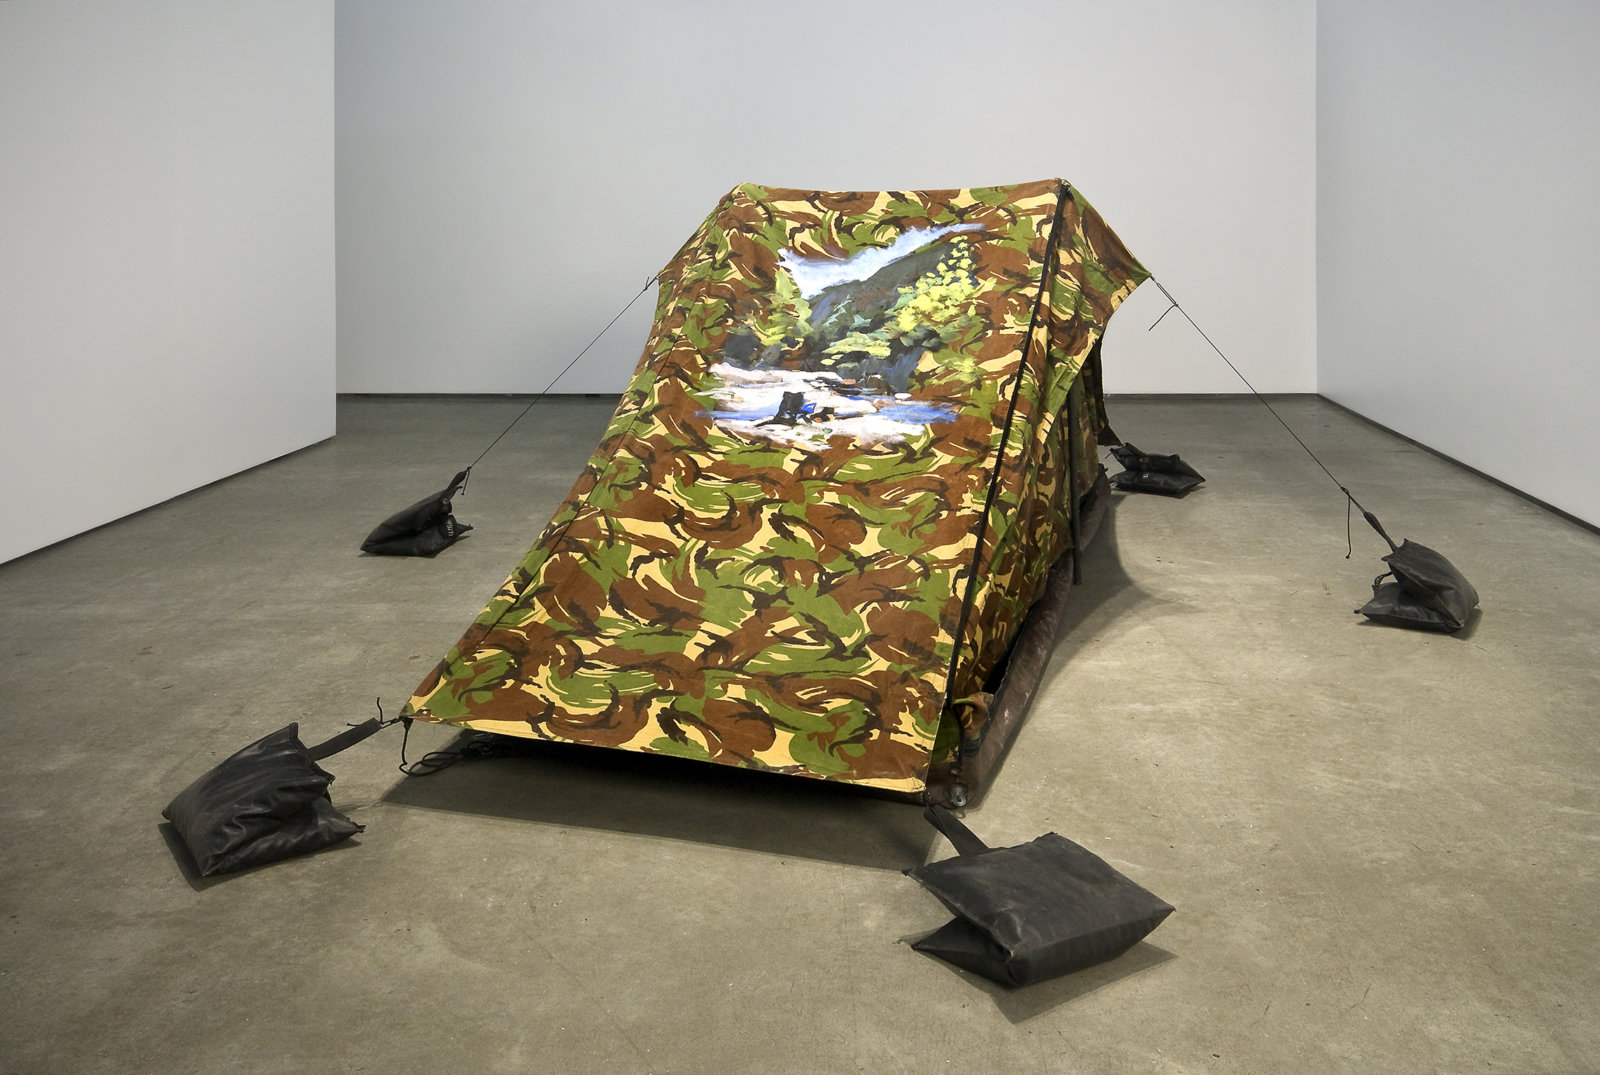 Kevin Schmidt, Disappearing Act (10 Mile Creek), 2009, canvas tent, acrylic print, 24 x 96 x 48 in. (61 x 244 x 122 cm)